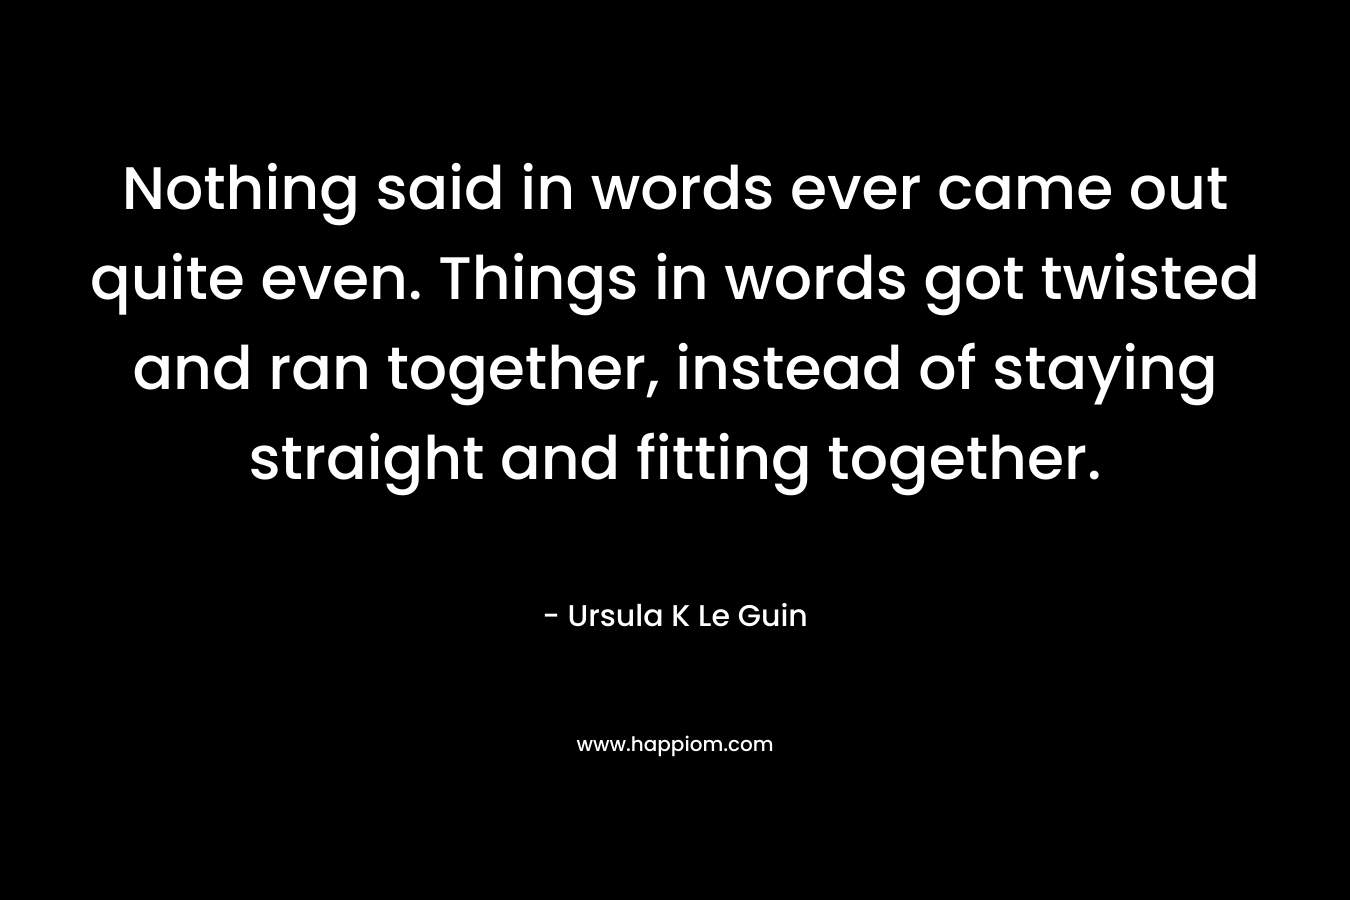 Nothing said in words ever came out quite even. Things in words got twisted and ran together, instead of staying straight and fitting together.